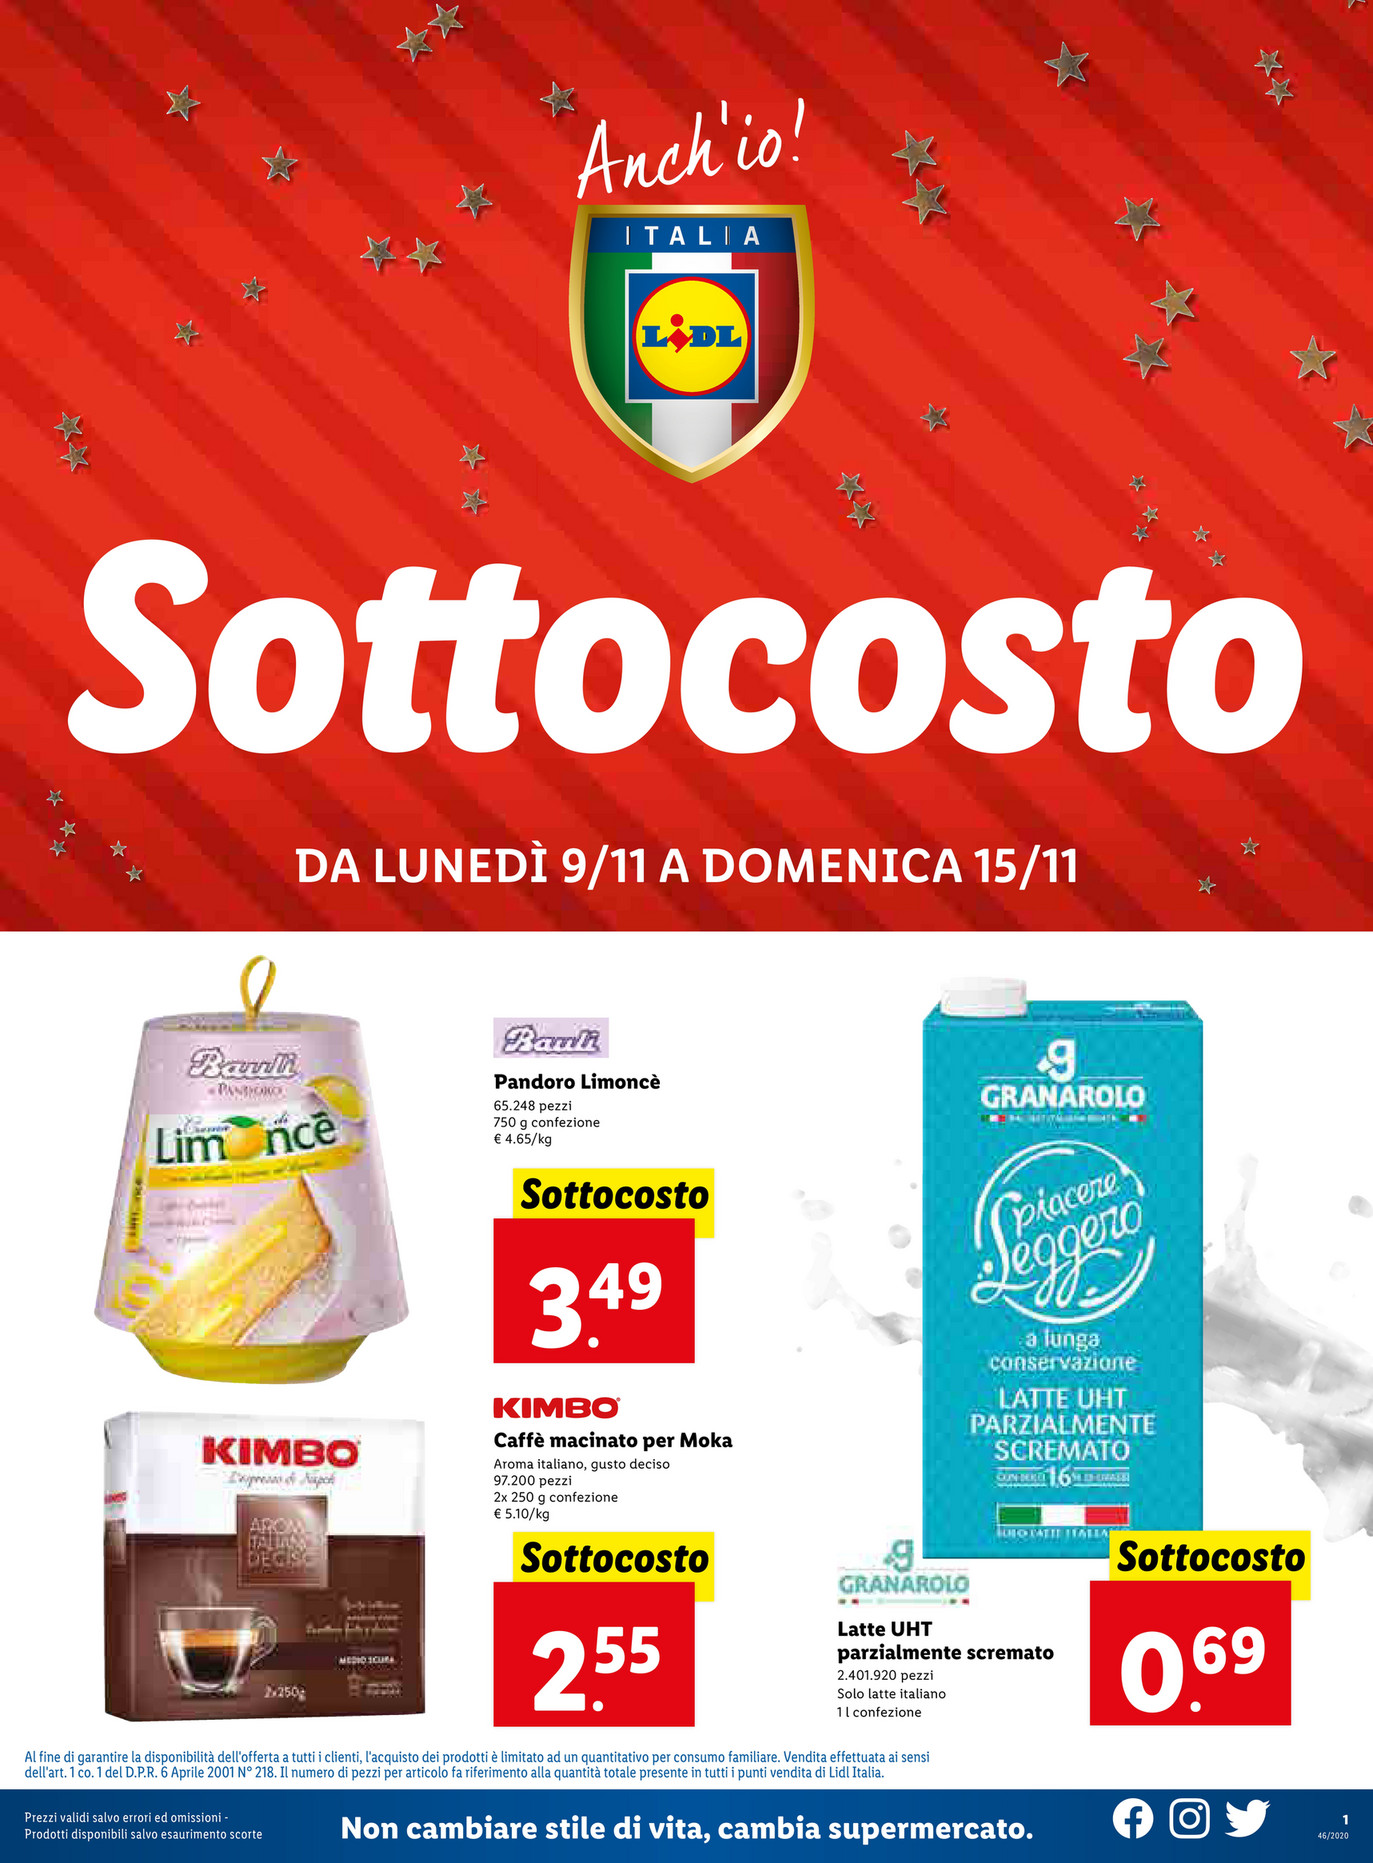 SP Volantino Lidl Novembre Page 1 Created with